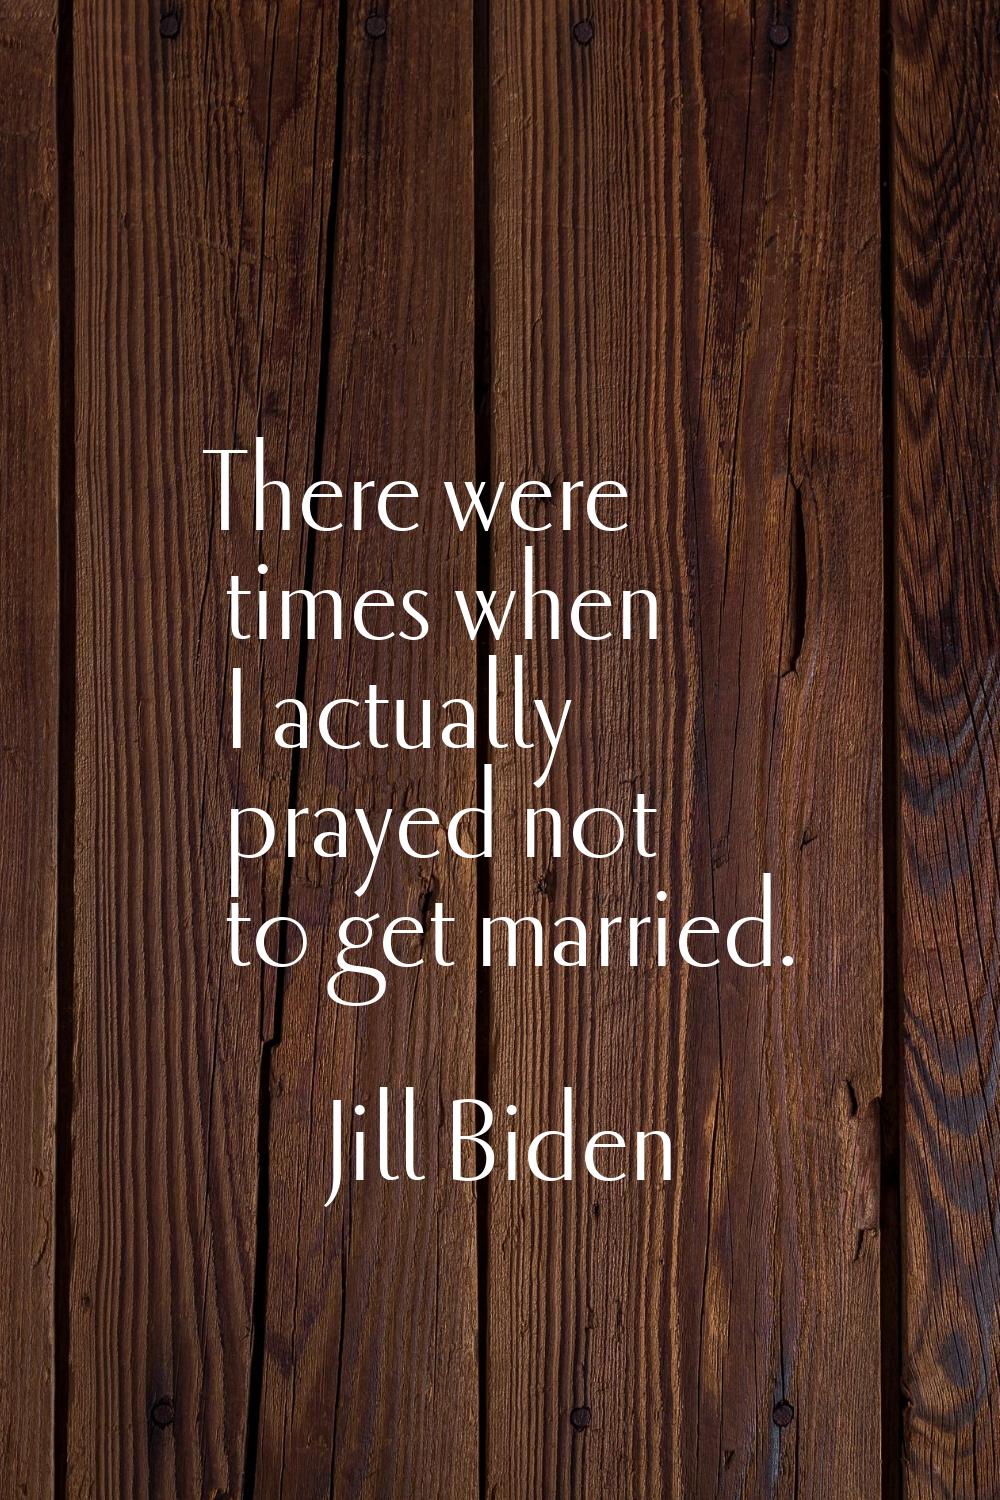 There were times when I actually prayed not to get married.